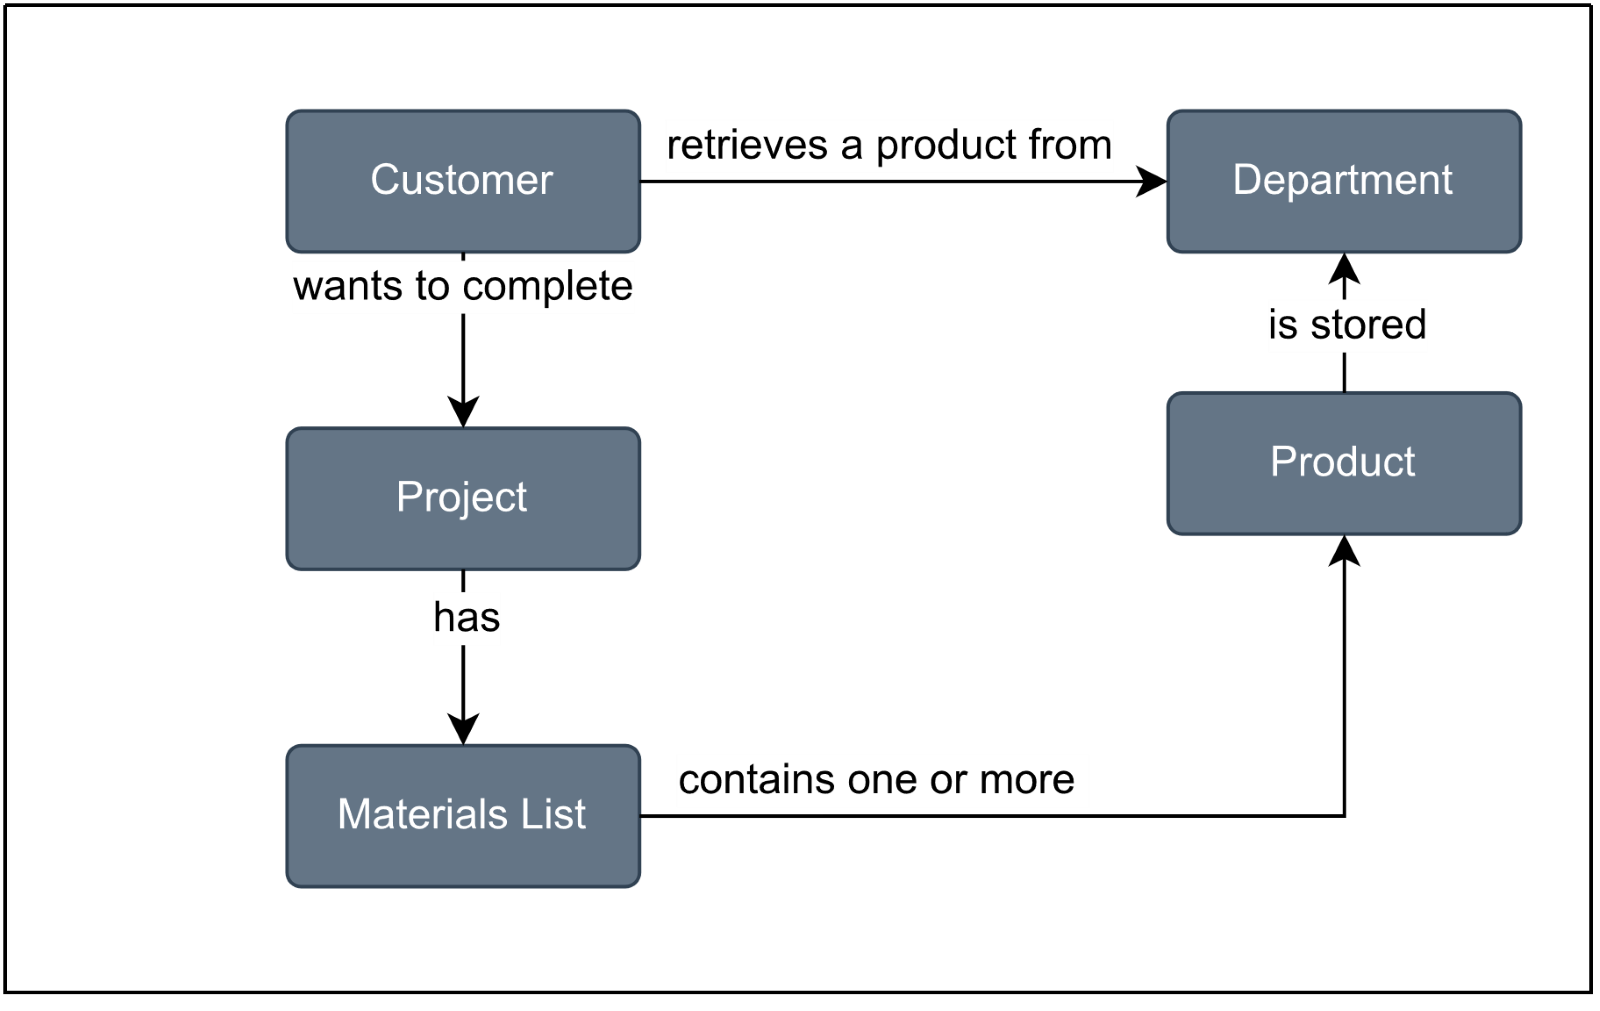 A diagram representing the relationships that exist among the customer, project, department, product, and materials list. 